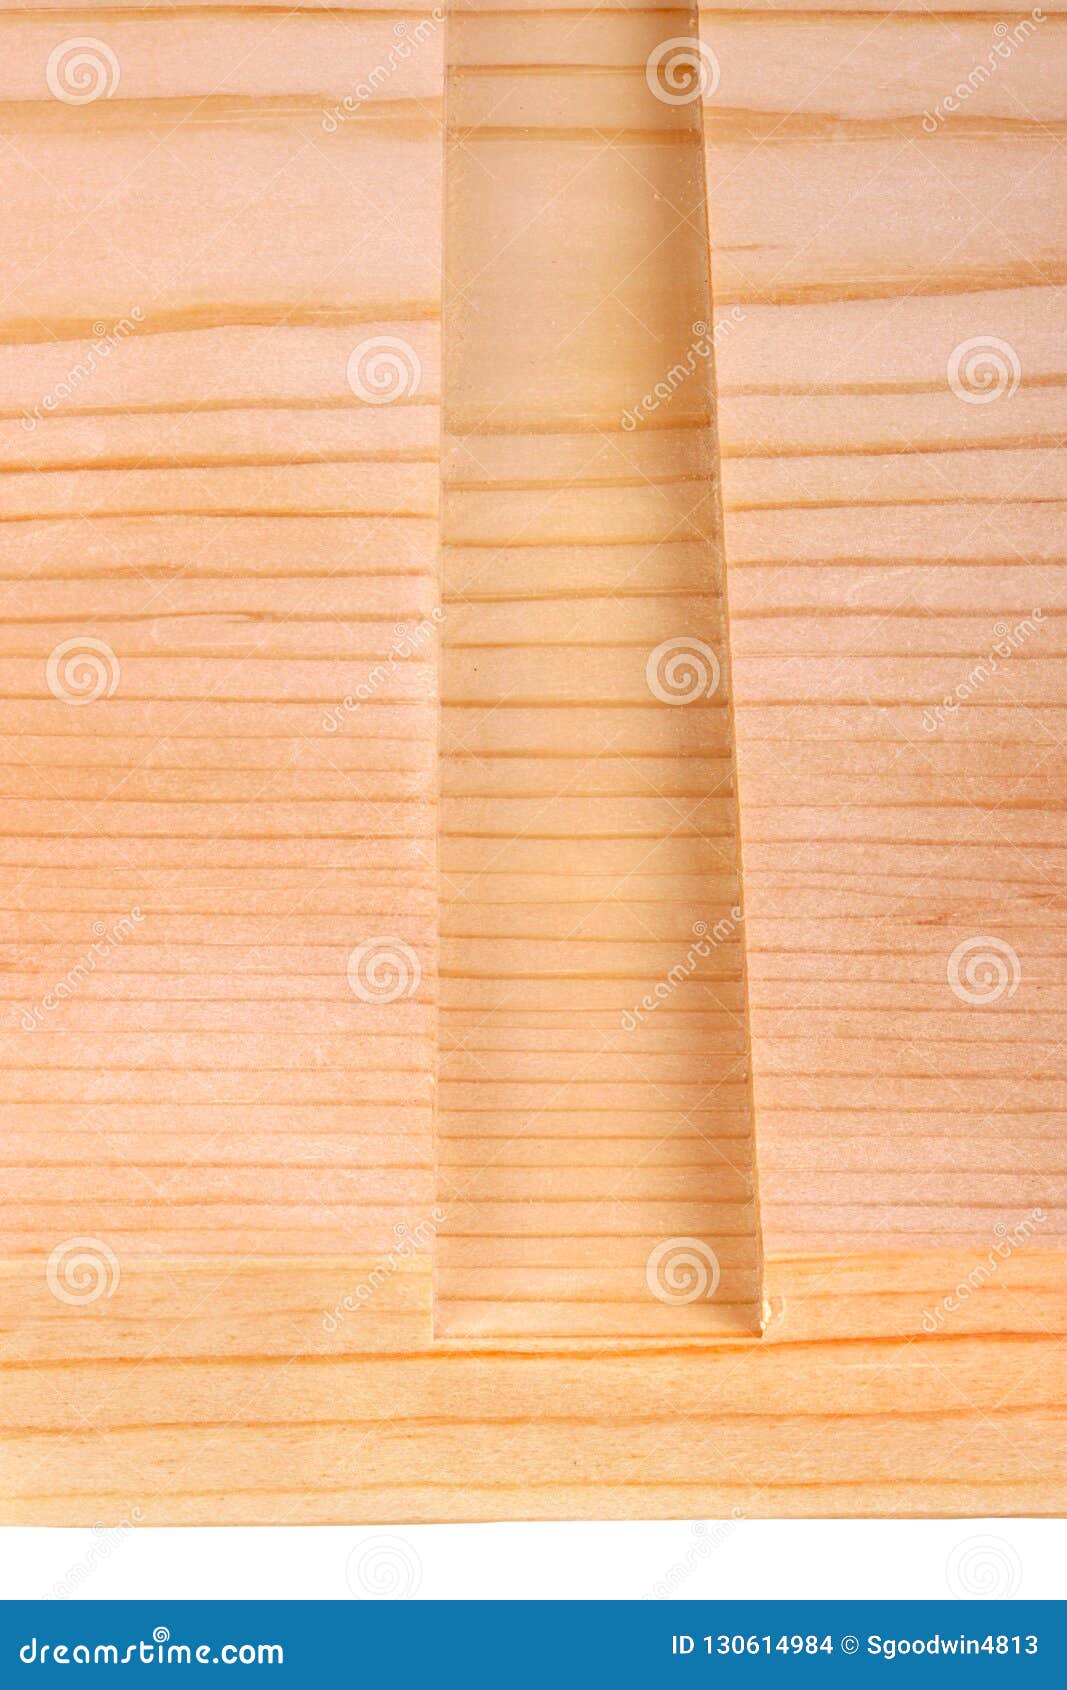 close-up of a board with a woodworking dado groove  vert